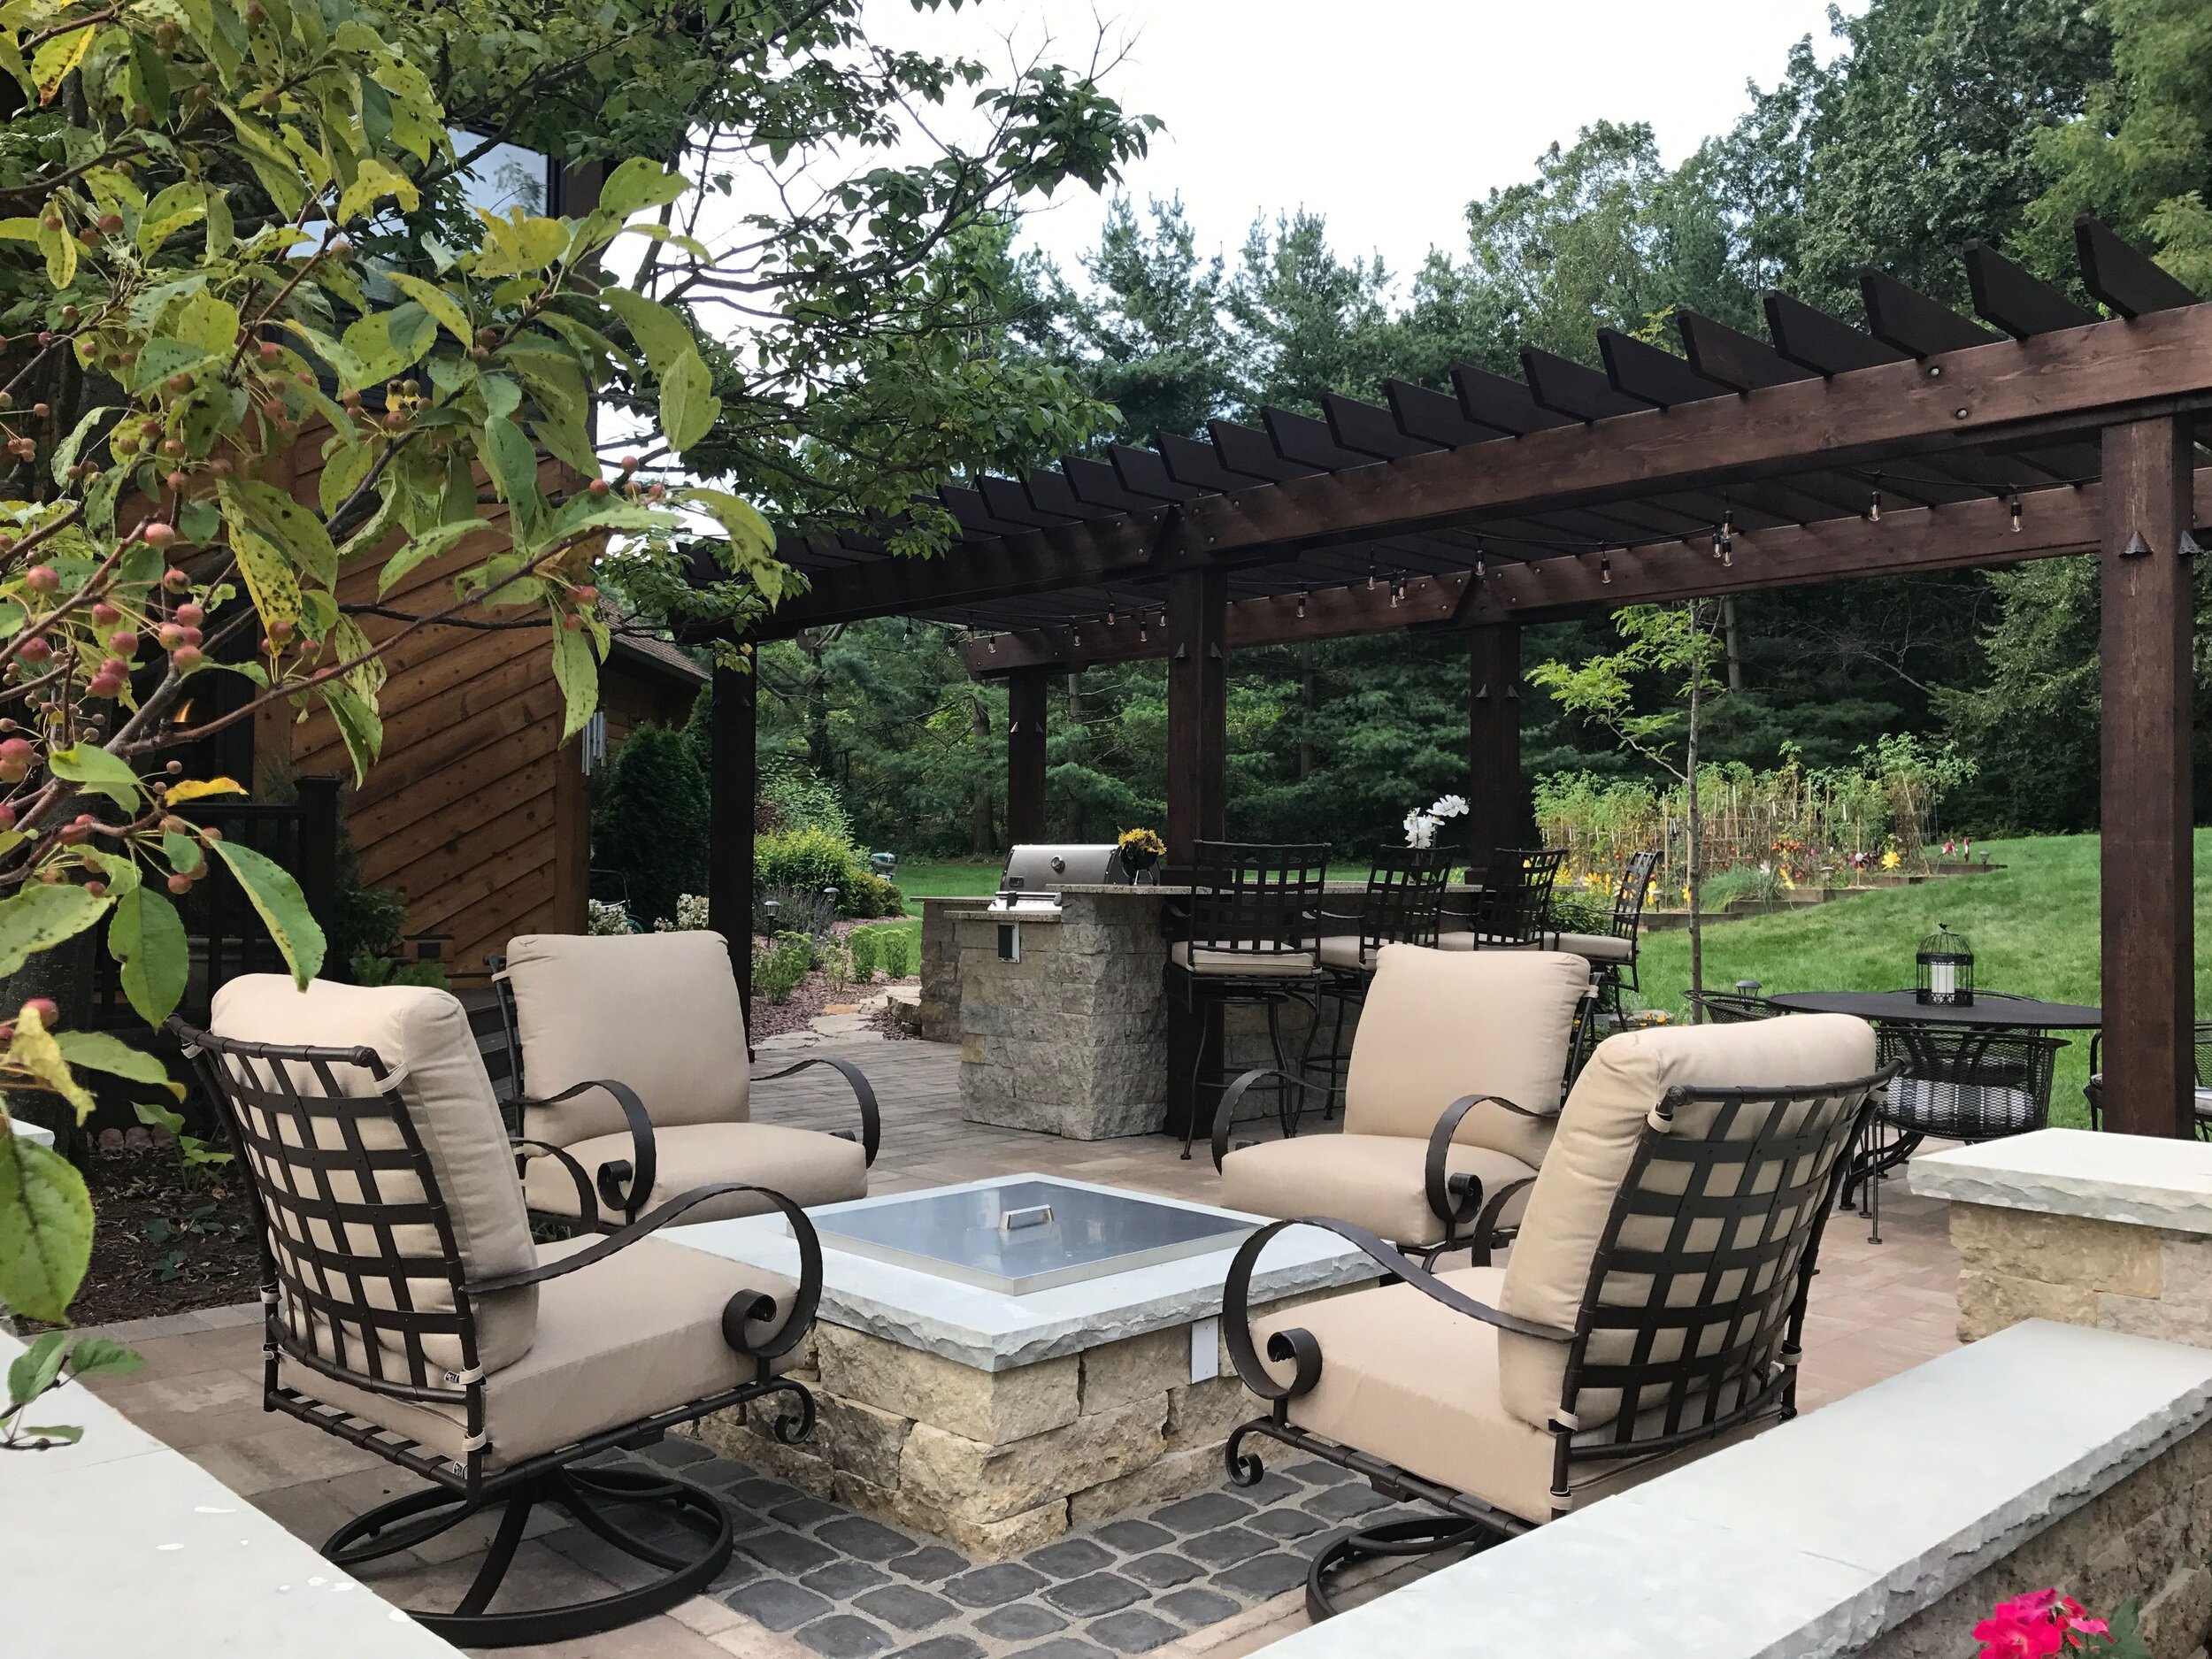 4 Backyard Fire Pit Design Ideas To Impress Your Guests In Shorewood Hills  And Verona, Wi | Landscape Architecture, Llc